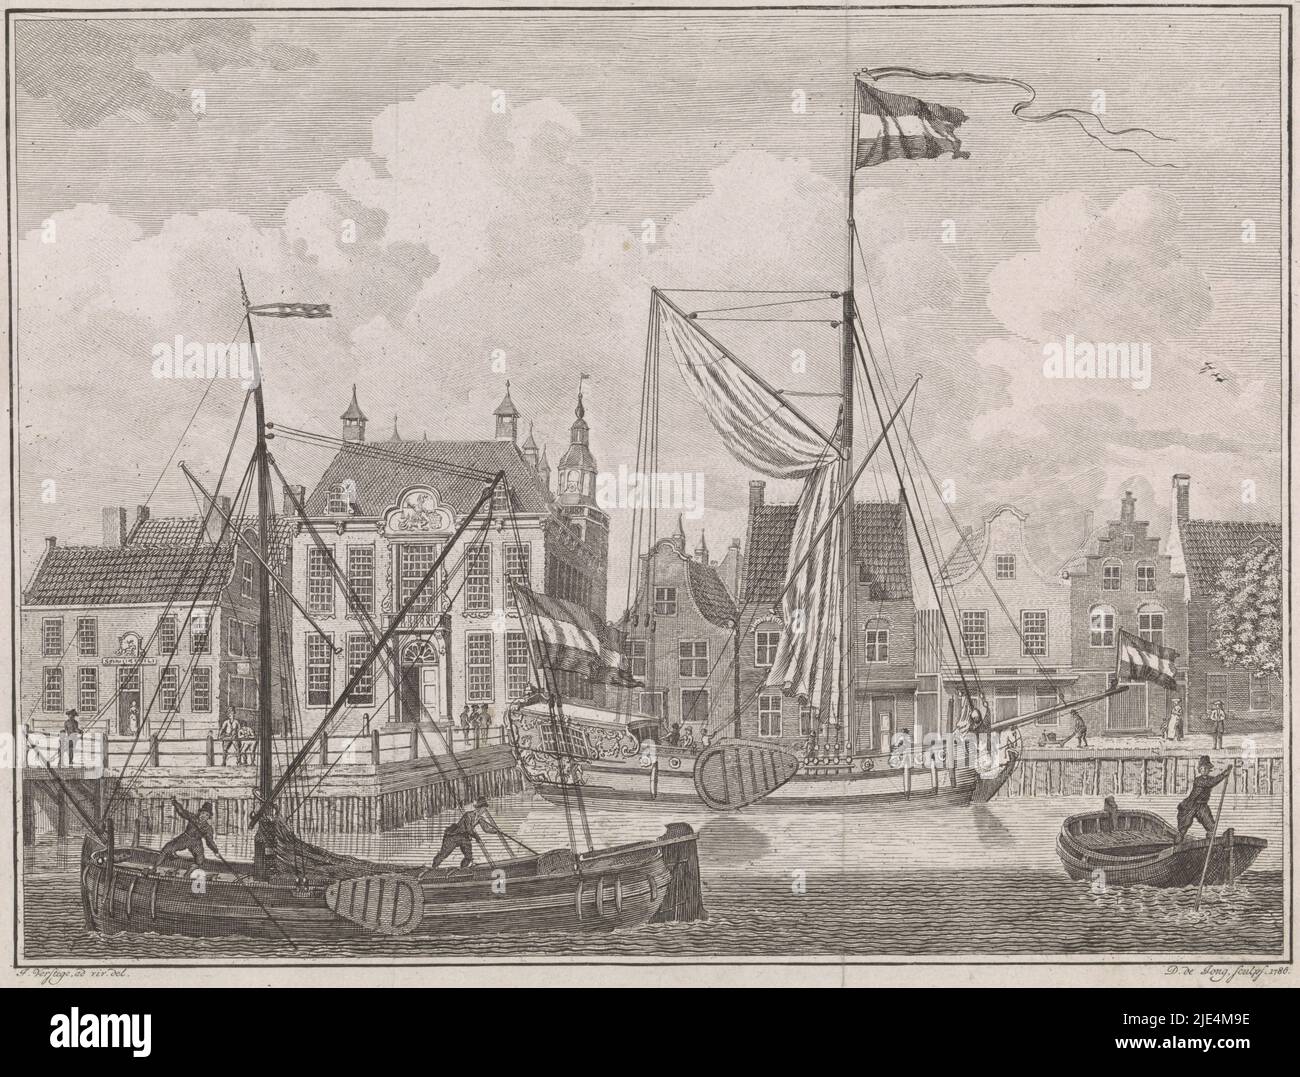 View of town hall at Harlingen, Dirk de Jong, after G. Verstege, 1786, View of the harbor and town hall at Harlingen. The Frisian state yacht is moored near the town hall. In the foreground are a tjalk and a praam. In the margin a caption in Dutch., print maker: Dirk de Jong, (mentioned on object), intermediary draughtsman: G. Verstege, (mentioned on object), Noord-Nederland, 1786, paper, etching, engraving, h 198 mm × w 251 mm Stock Photo